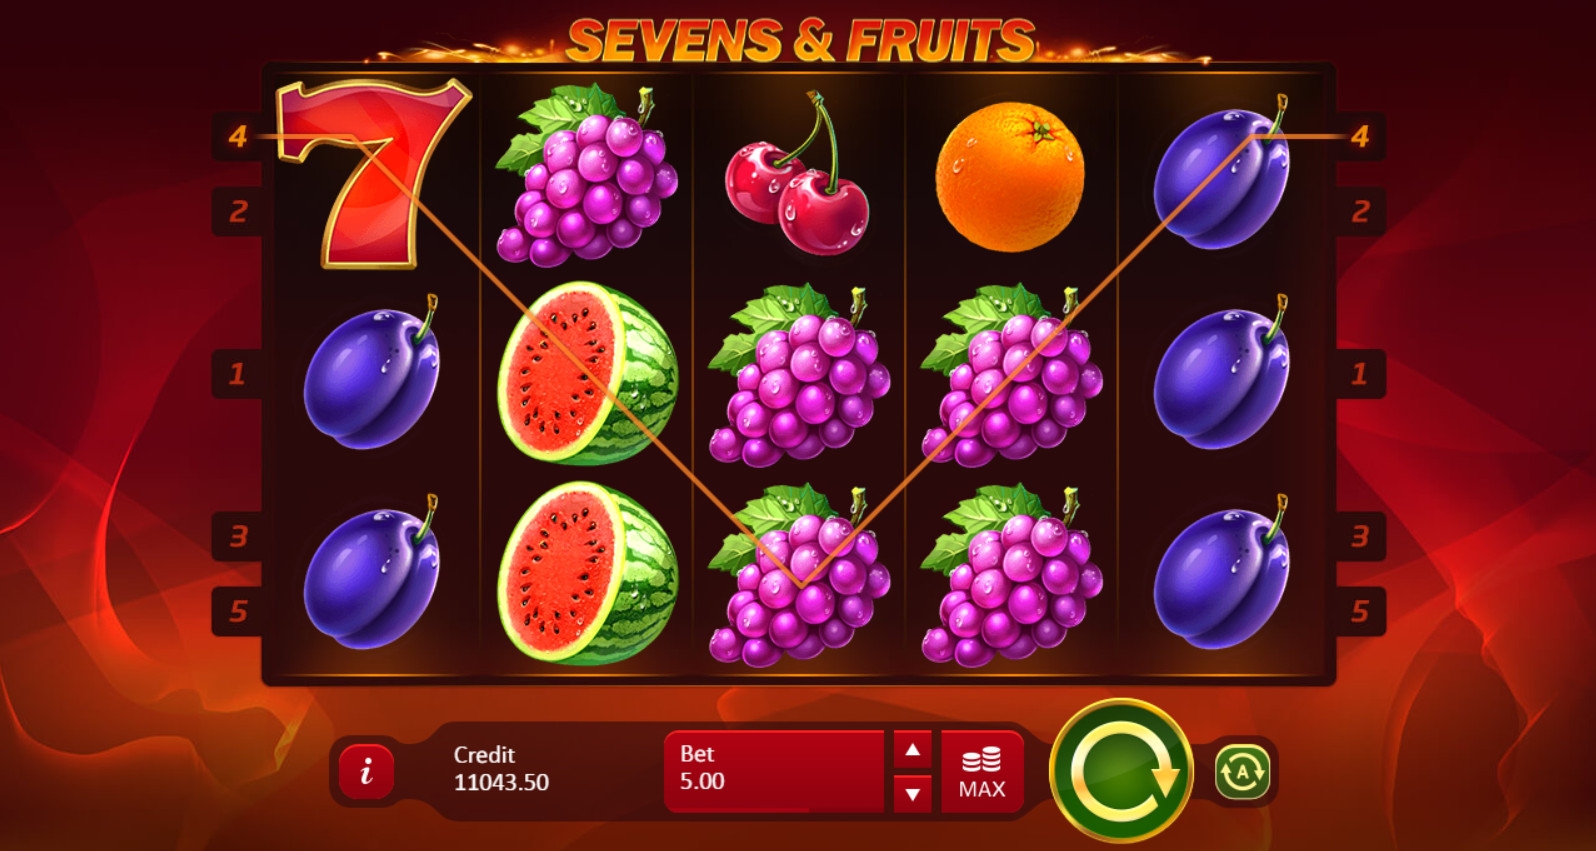 Sevens and Fruits (Sevens and Fruits) from category Slots